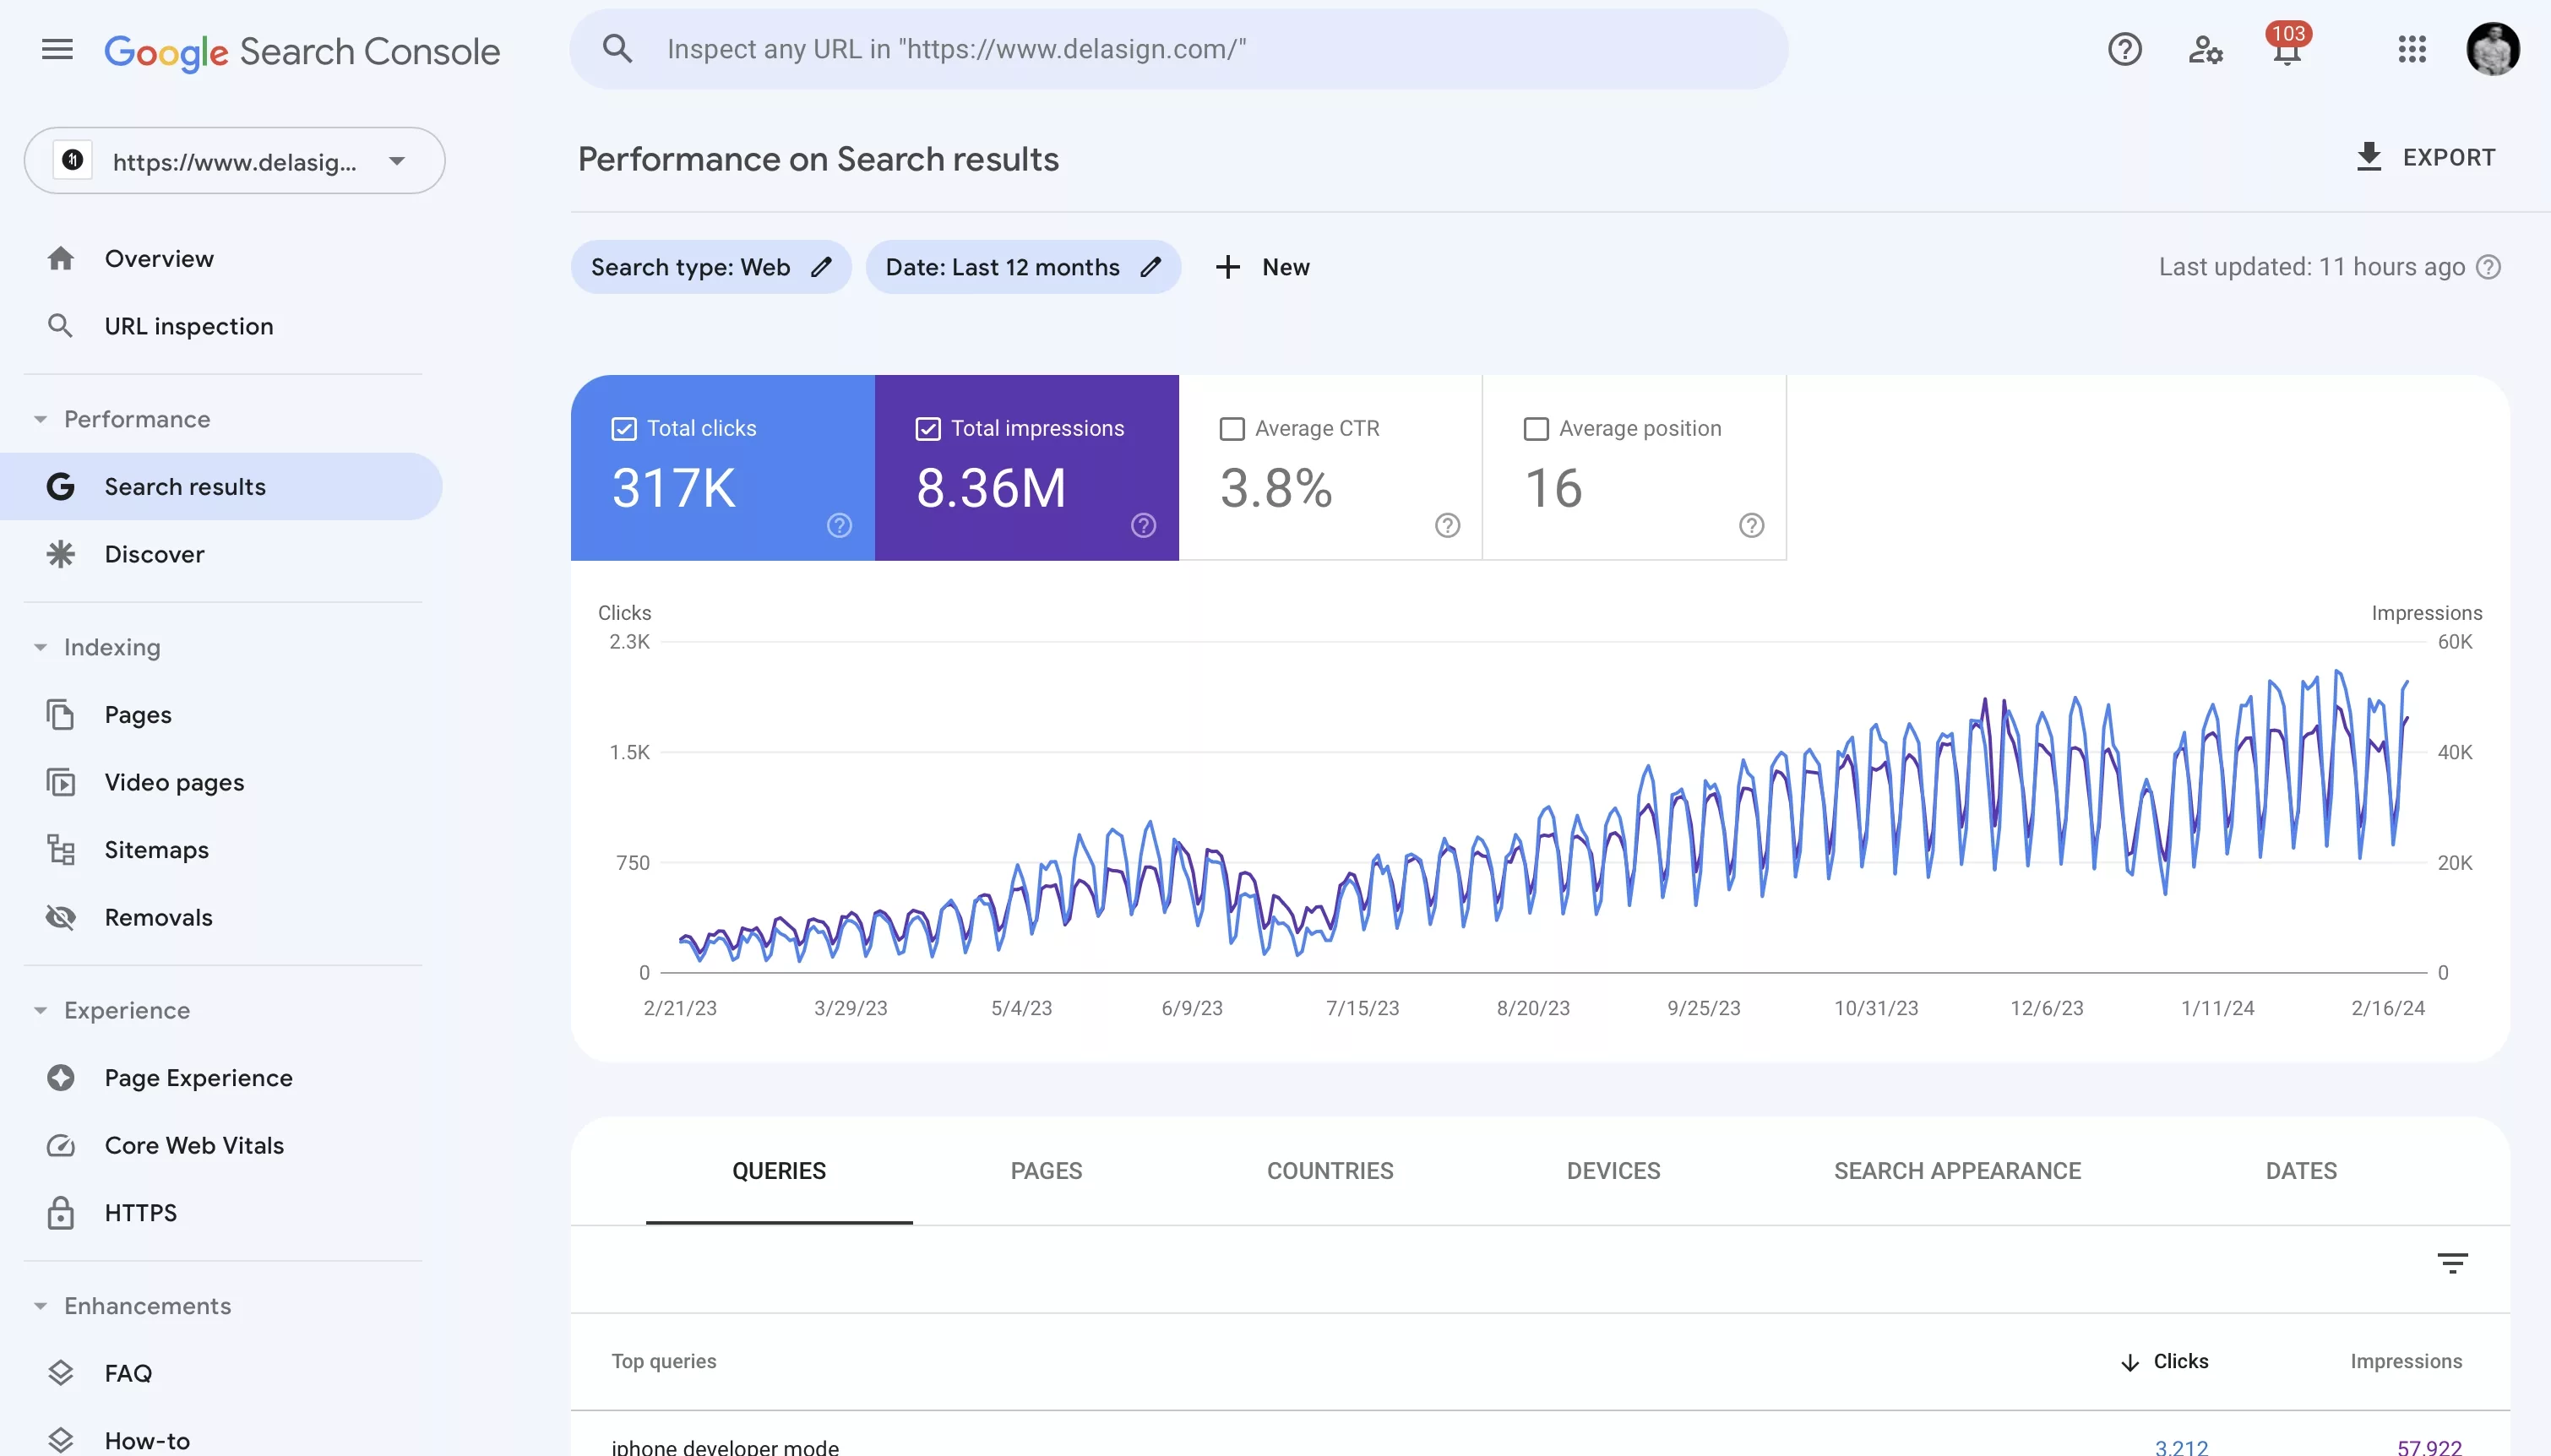 A screenshot of the Google Search Console performance tab that shows impressions and clicks over the period of a year.